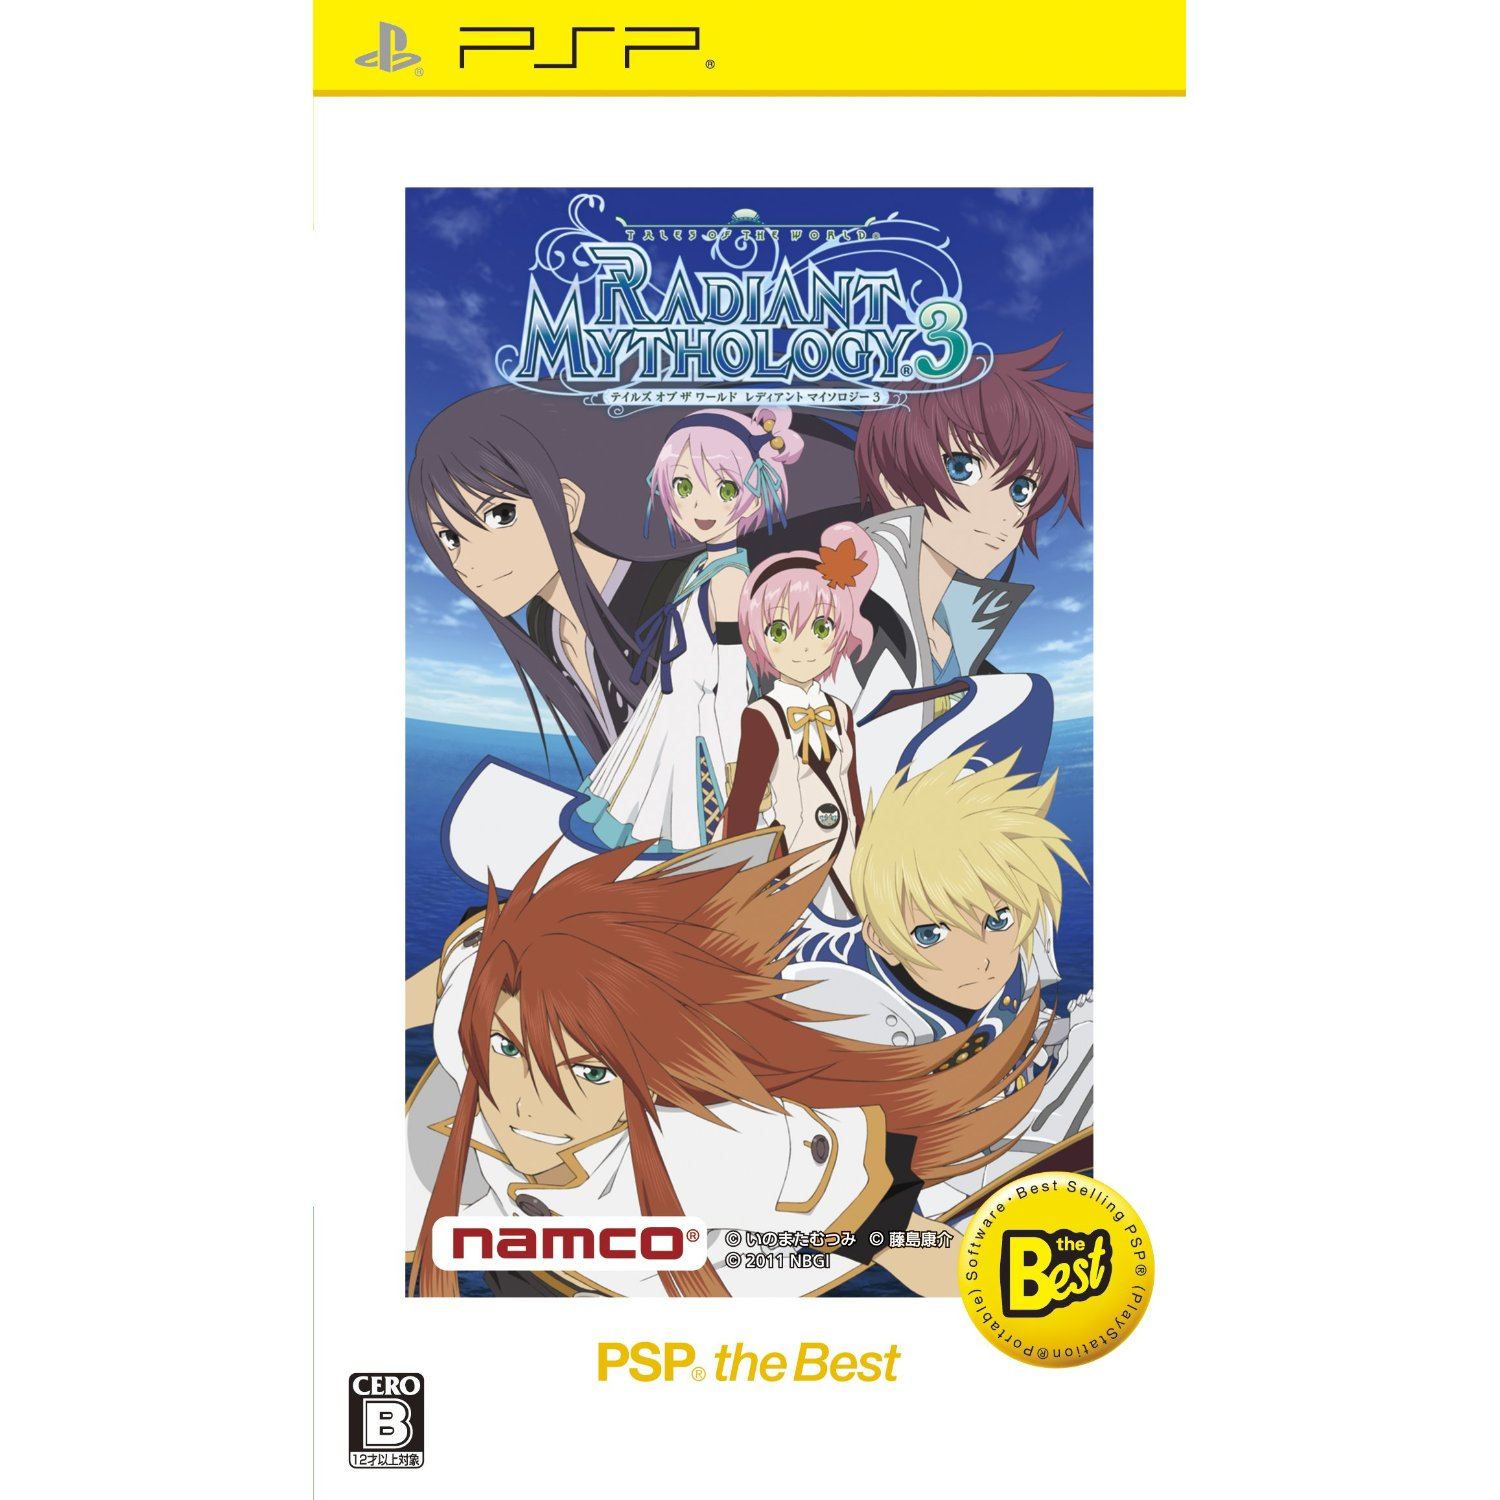 tales of destiny 2 psp english patch iso